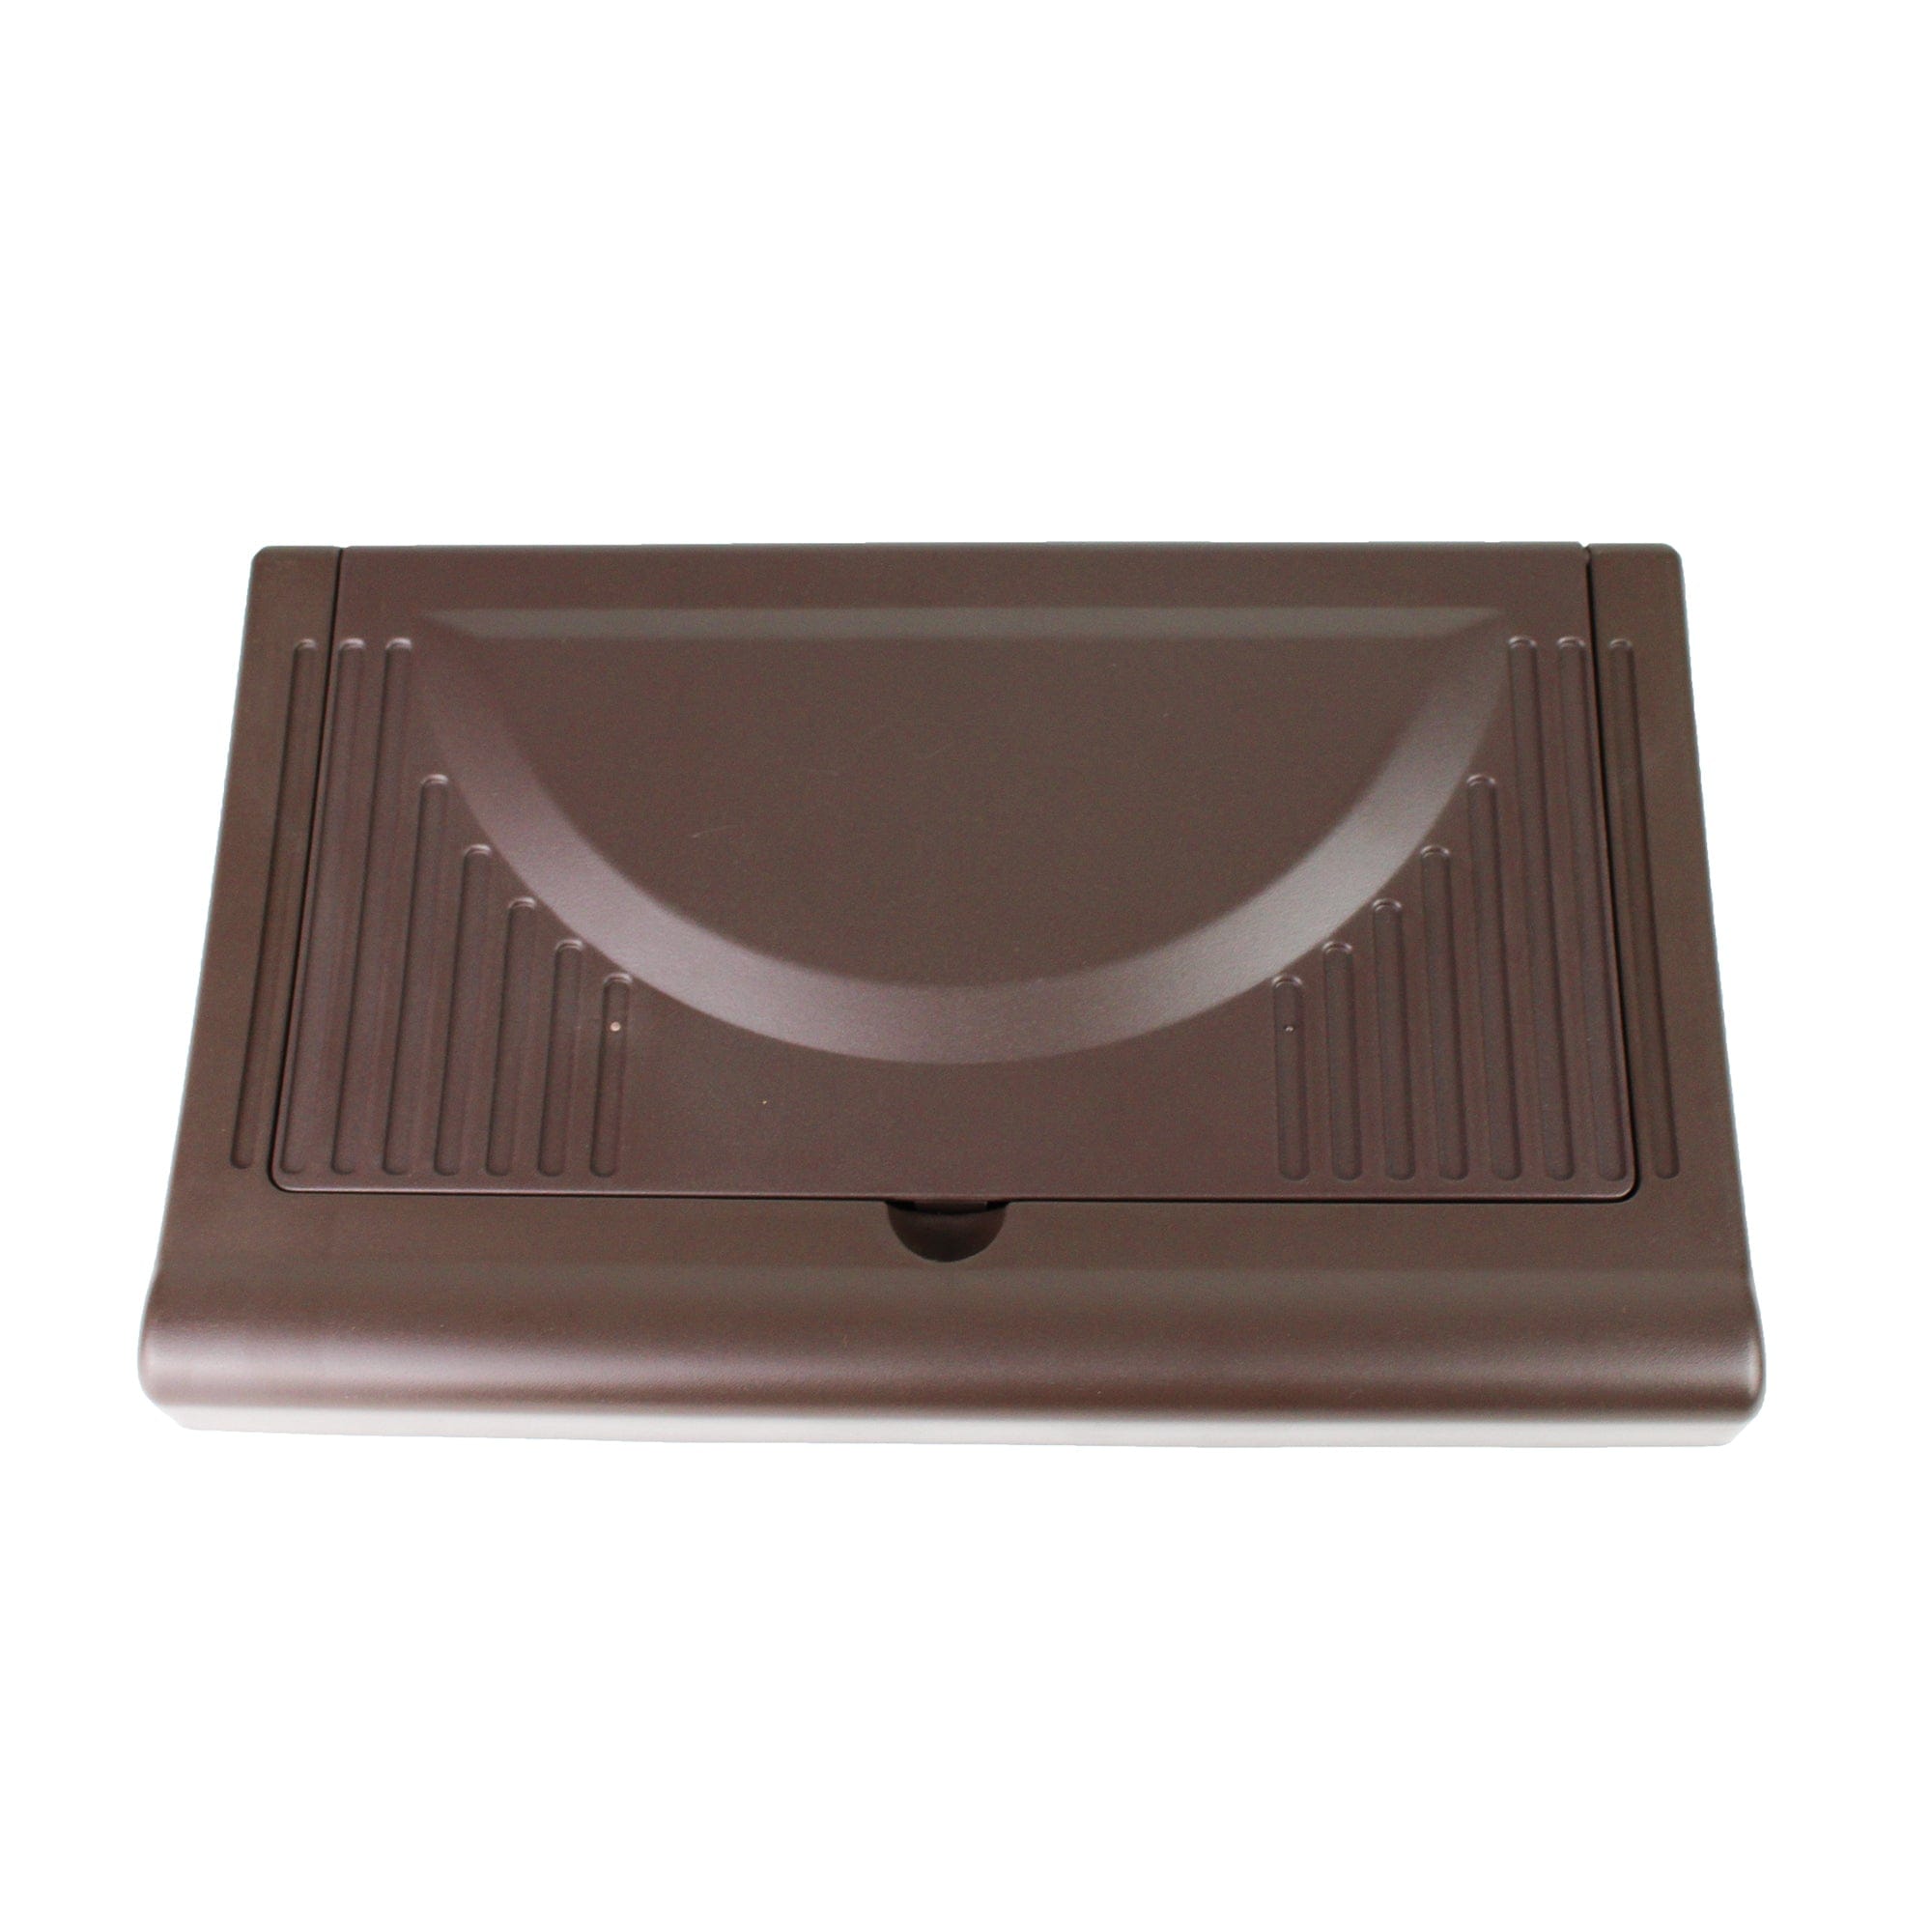 WFCO WF-8712-PDA Brown Plastic Door Assembly for WF-8712-P, 7-1/4"x11-3/4"